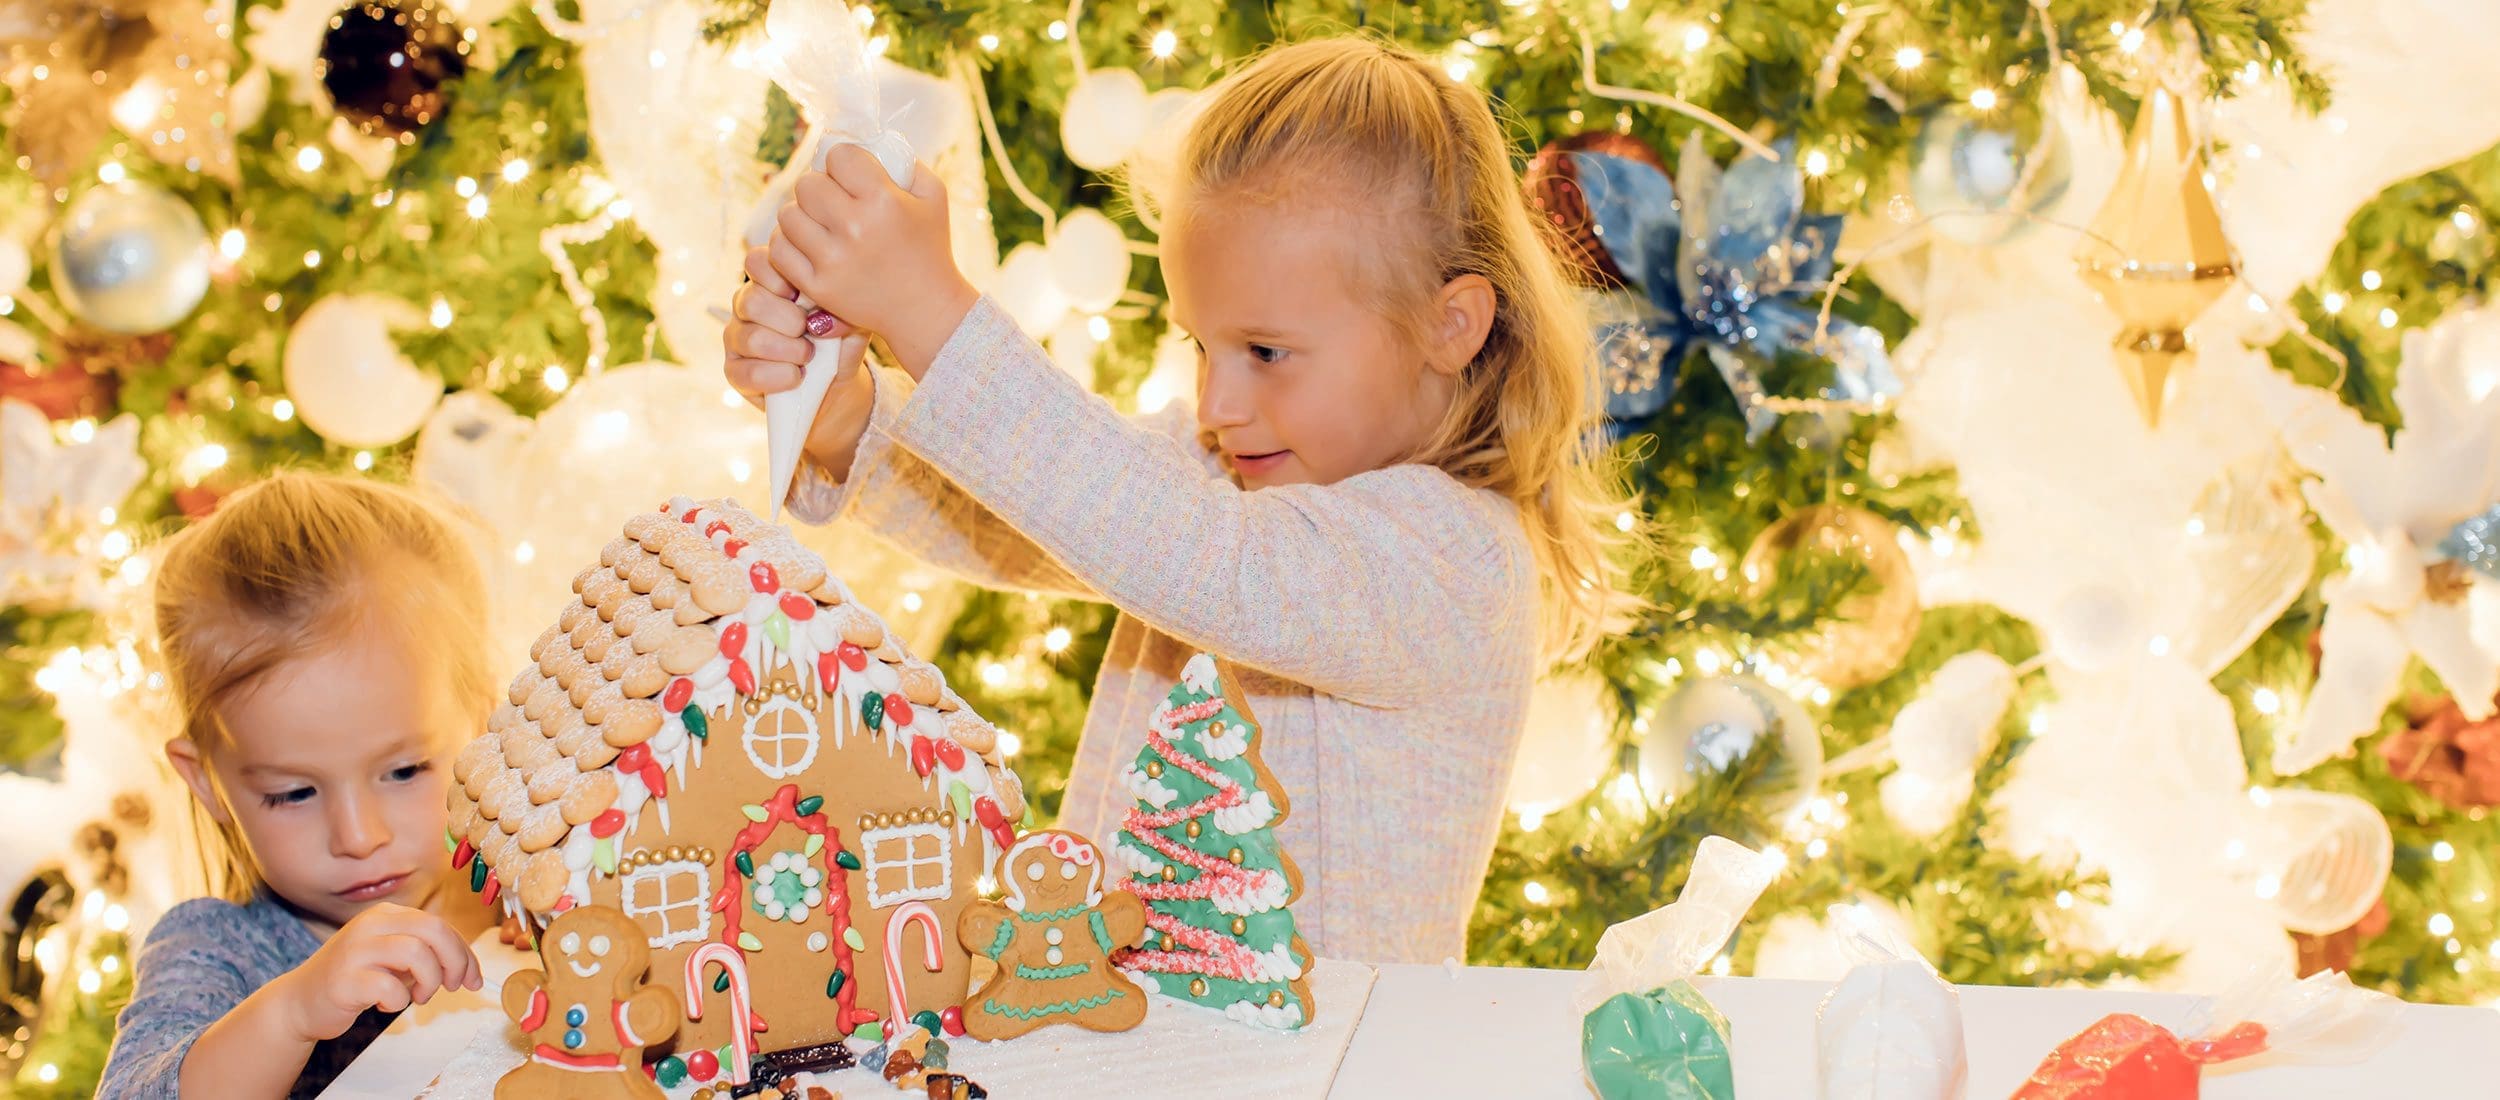 Girl decorating gingerbread house